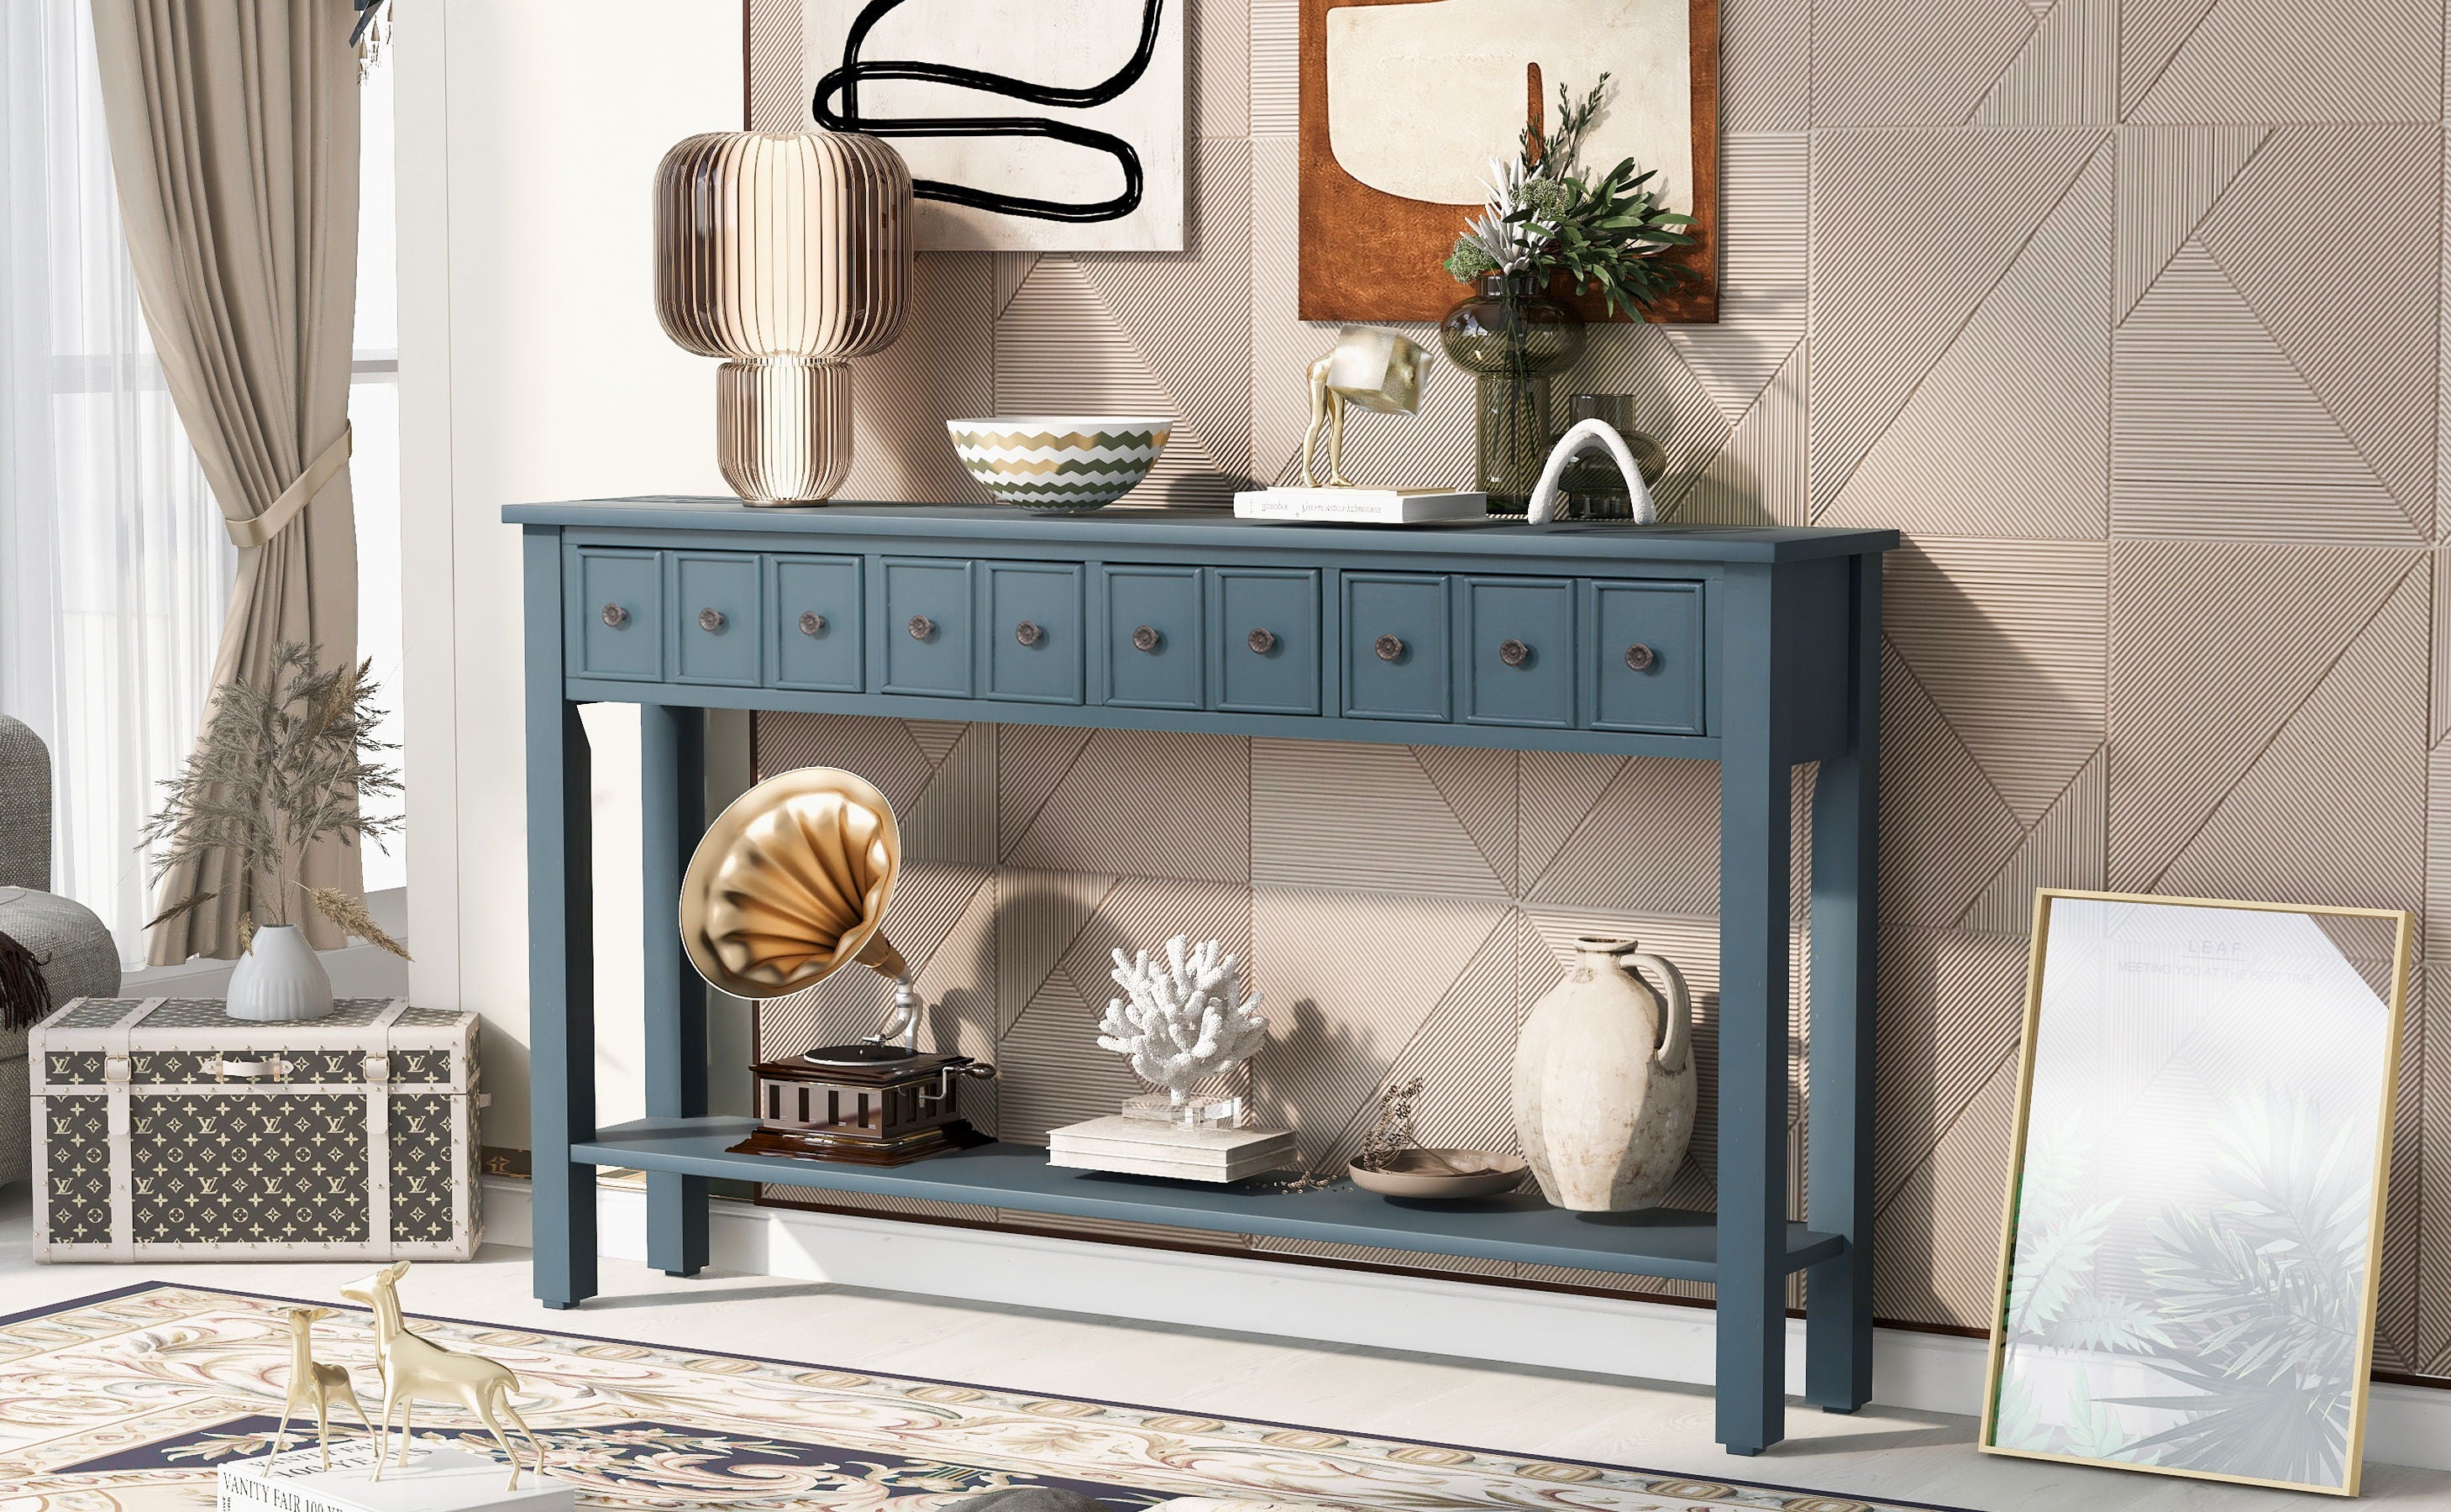 Trexm Rustic Entryway Console Table, 60" Long Sofa Table With Two Different Size Drawers And Bottom Shelf For Storage (Navy)